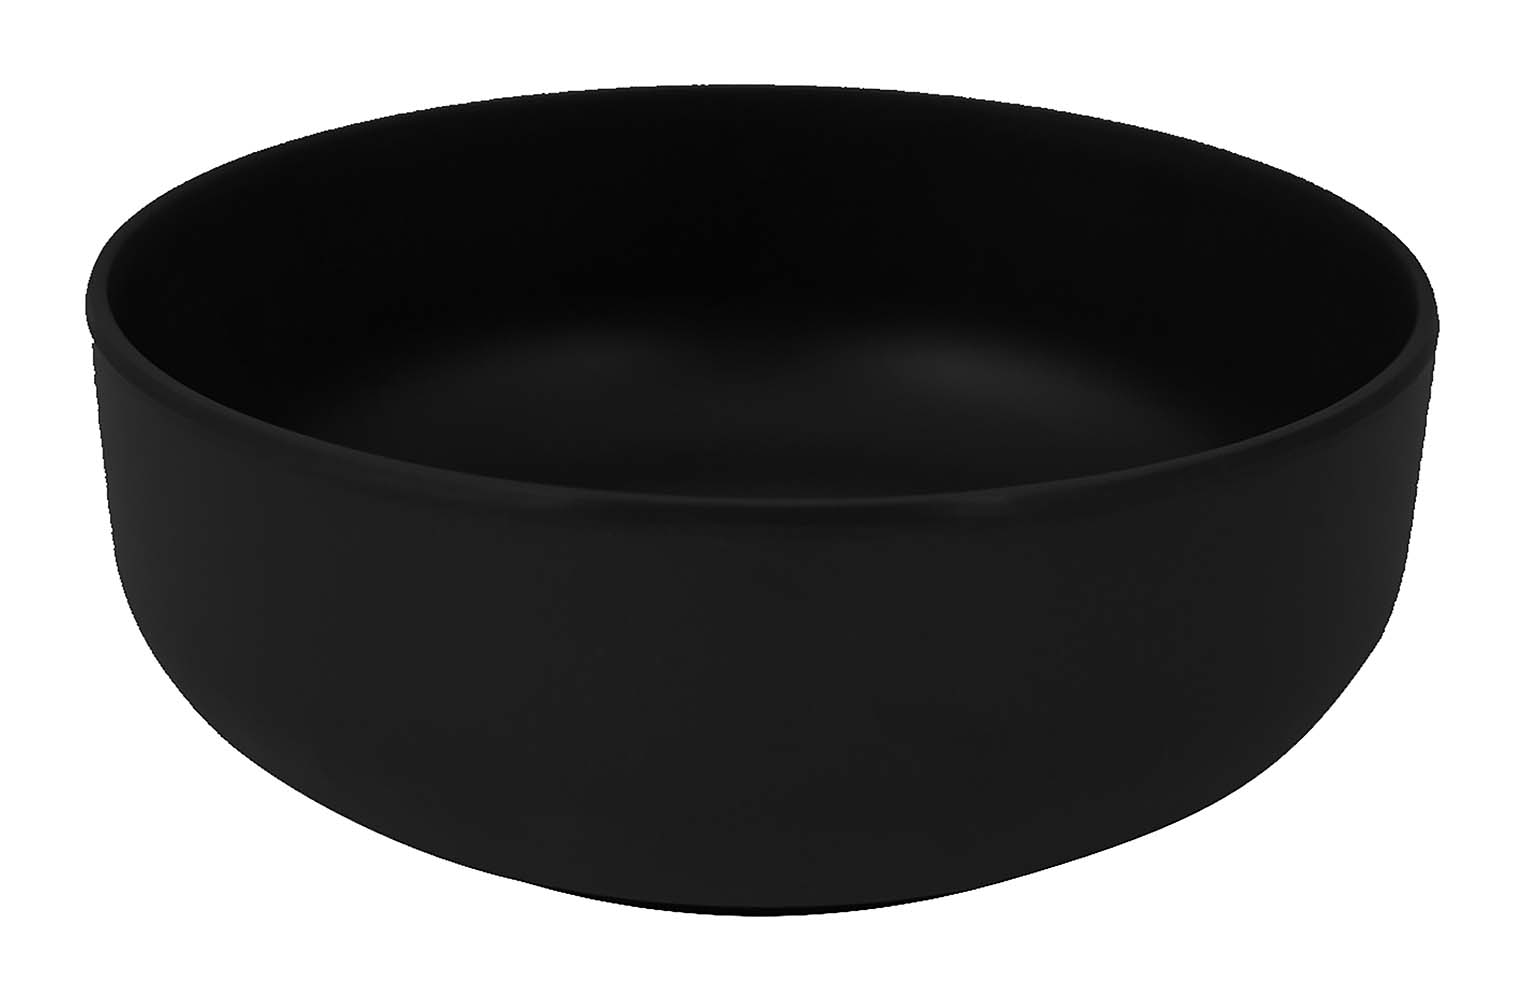 Bo-Camp - Industrial collection - Tableware - Patom - Melamine - 16 Pieces - Black detail 4